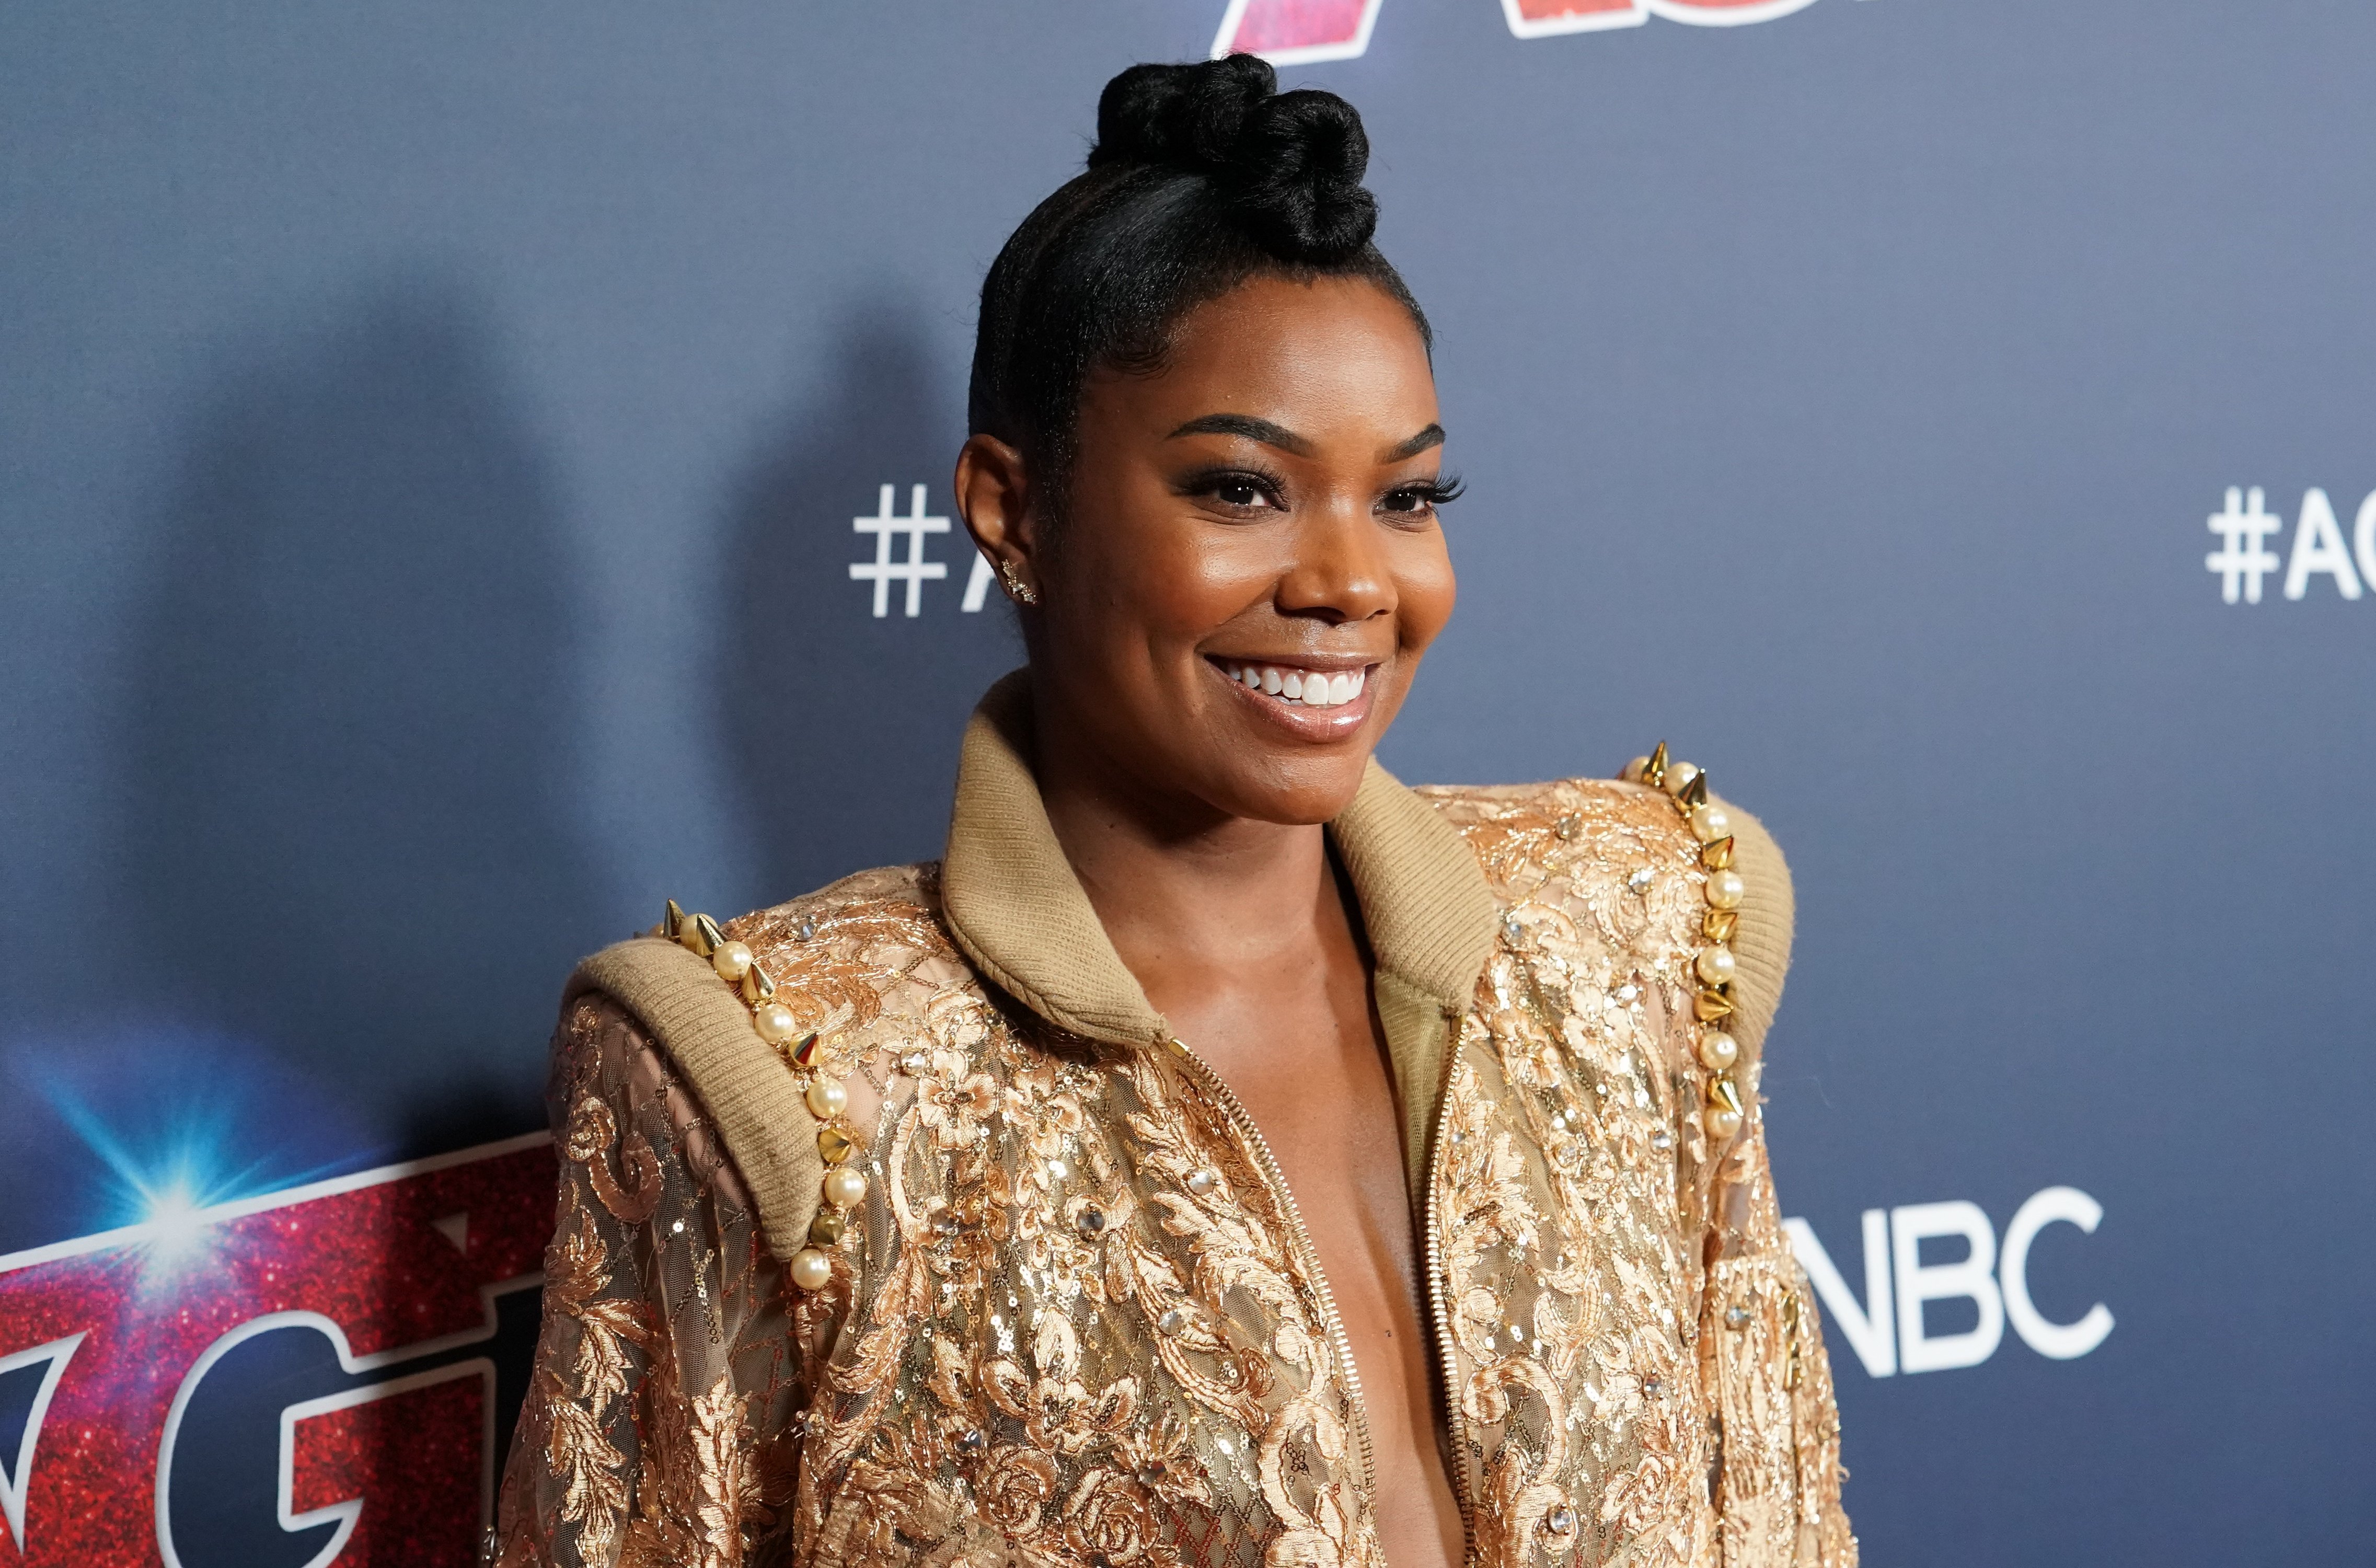 Gabrielle Union attends "America's Got Talent" Season 14 Live Show Red Carpet at Dolby Theatre on September 03, 2019, in Hollywood, California | Source: Getty Images